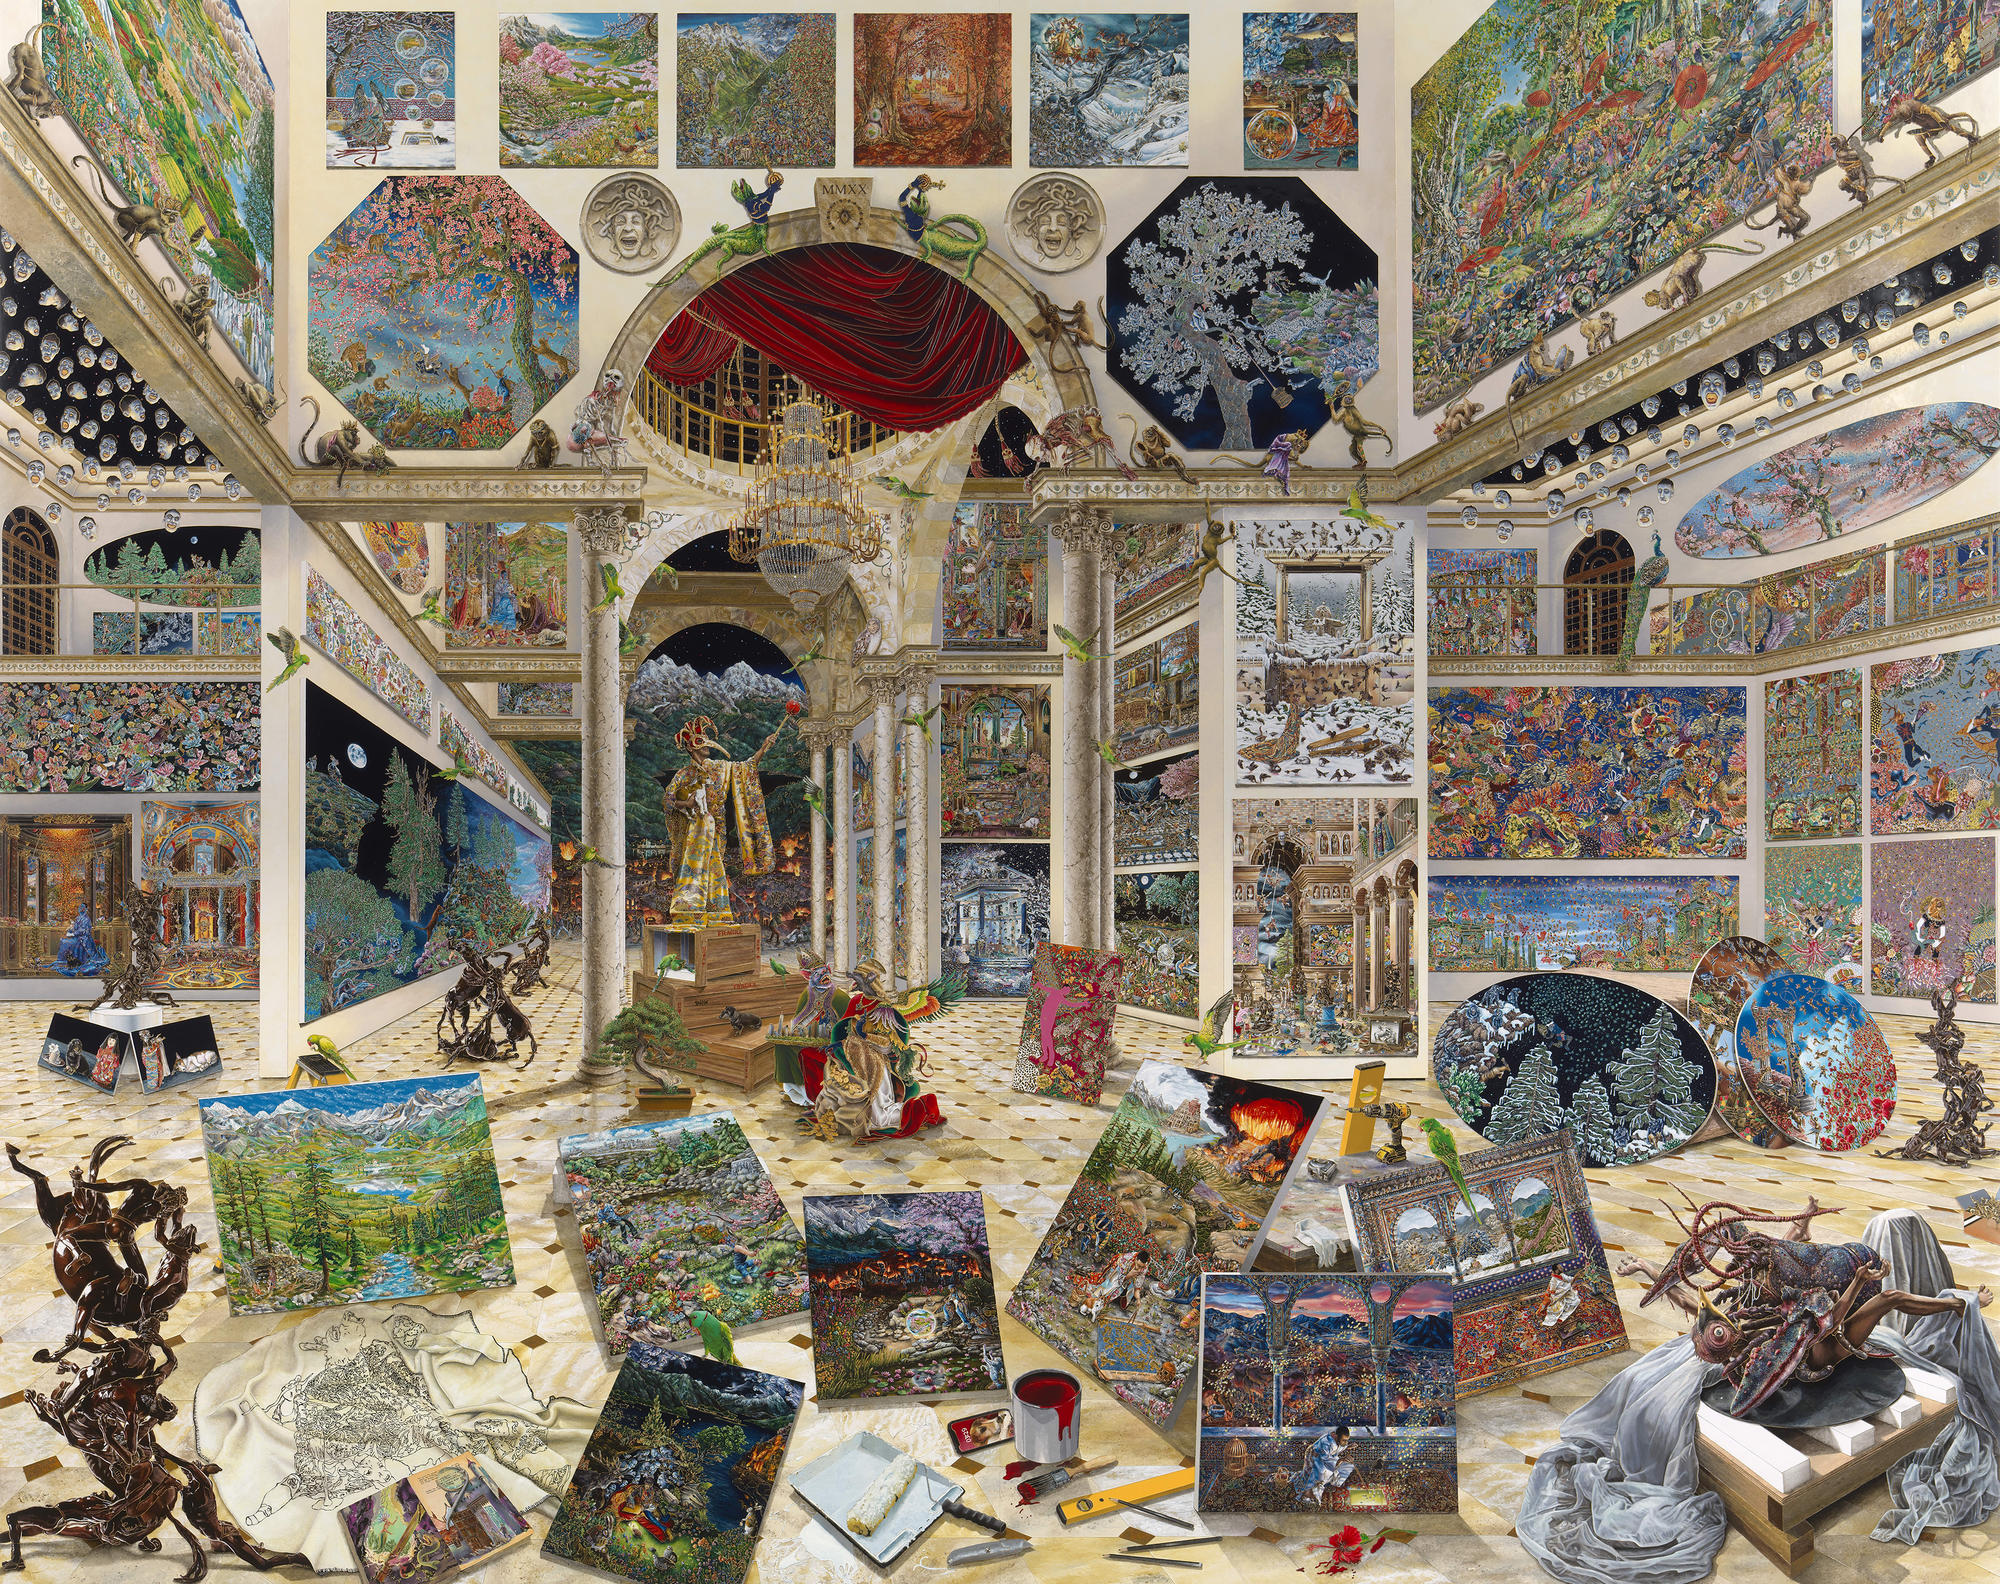 Images of many different works of Raqib Shaw within a Raqib Shaw painting. 